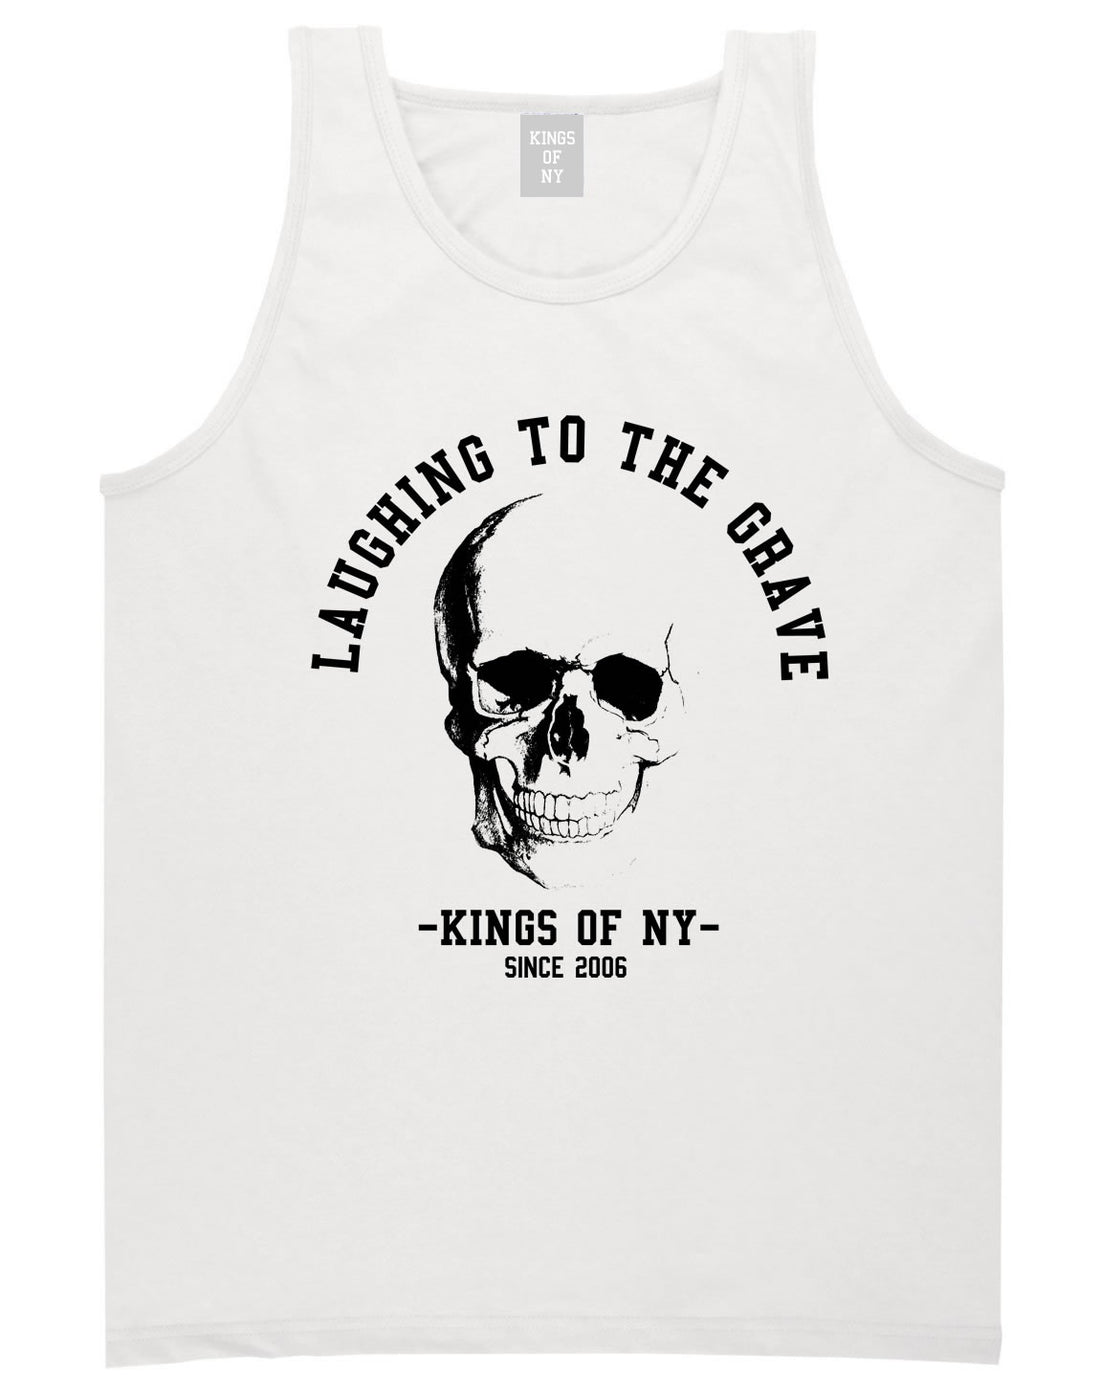 Laughing To The Grave Skull 2006 Tank Top in White By Kings Of NY